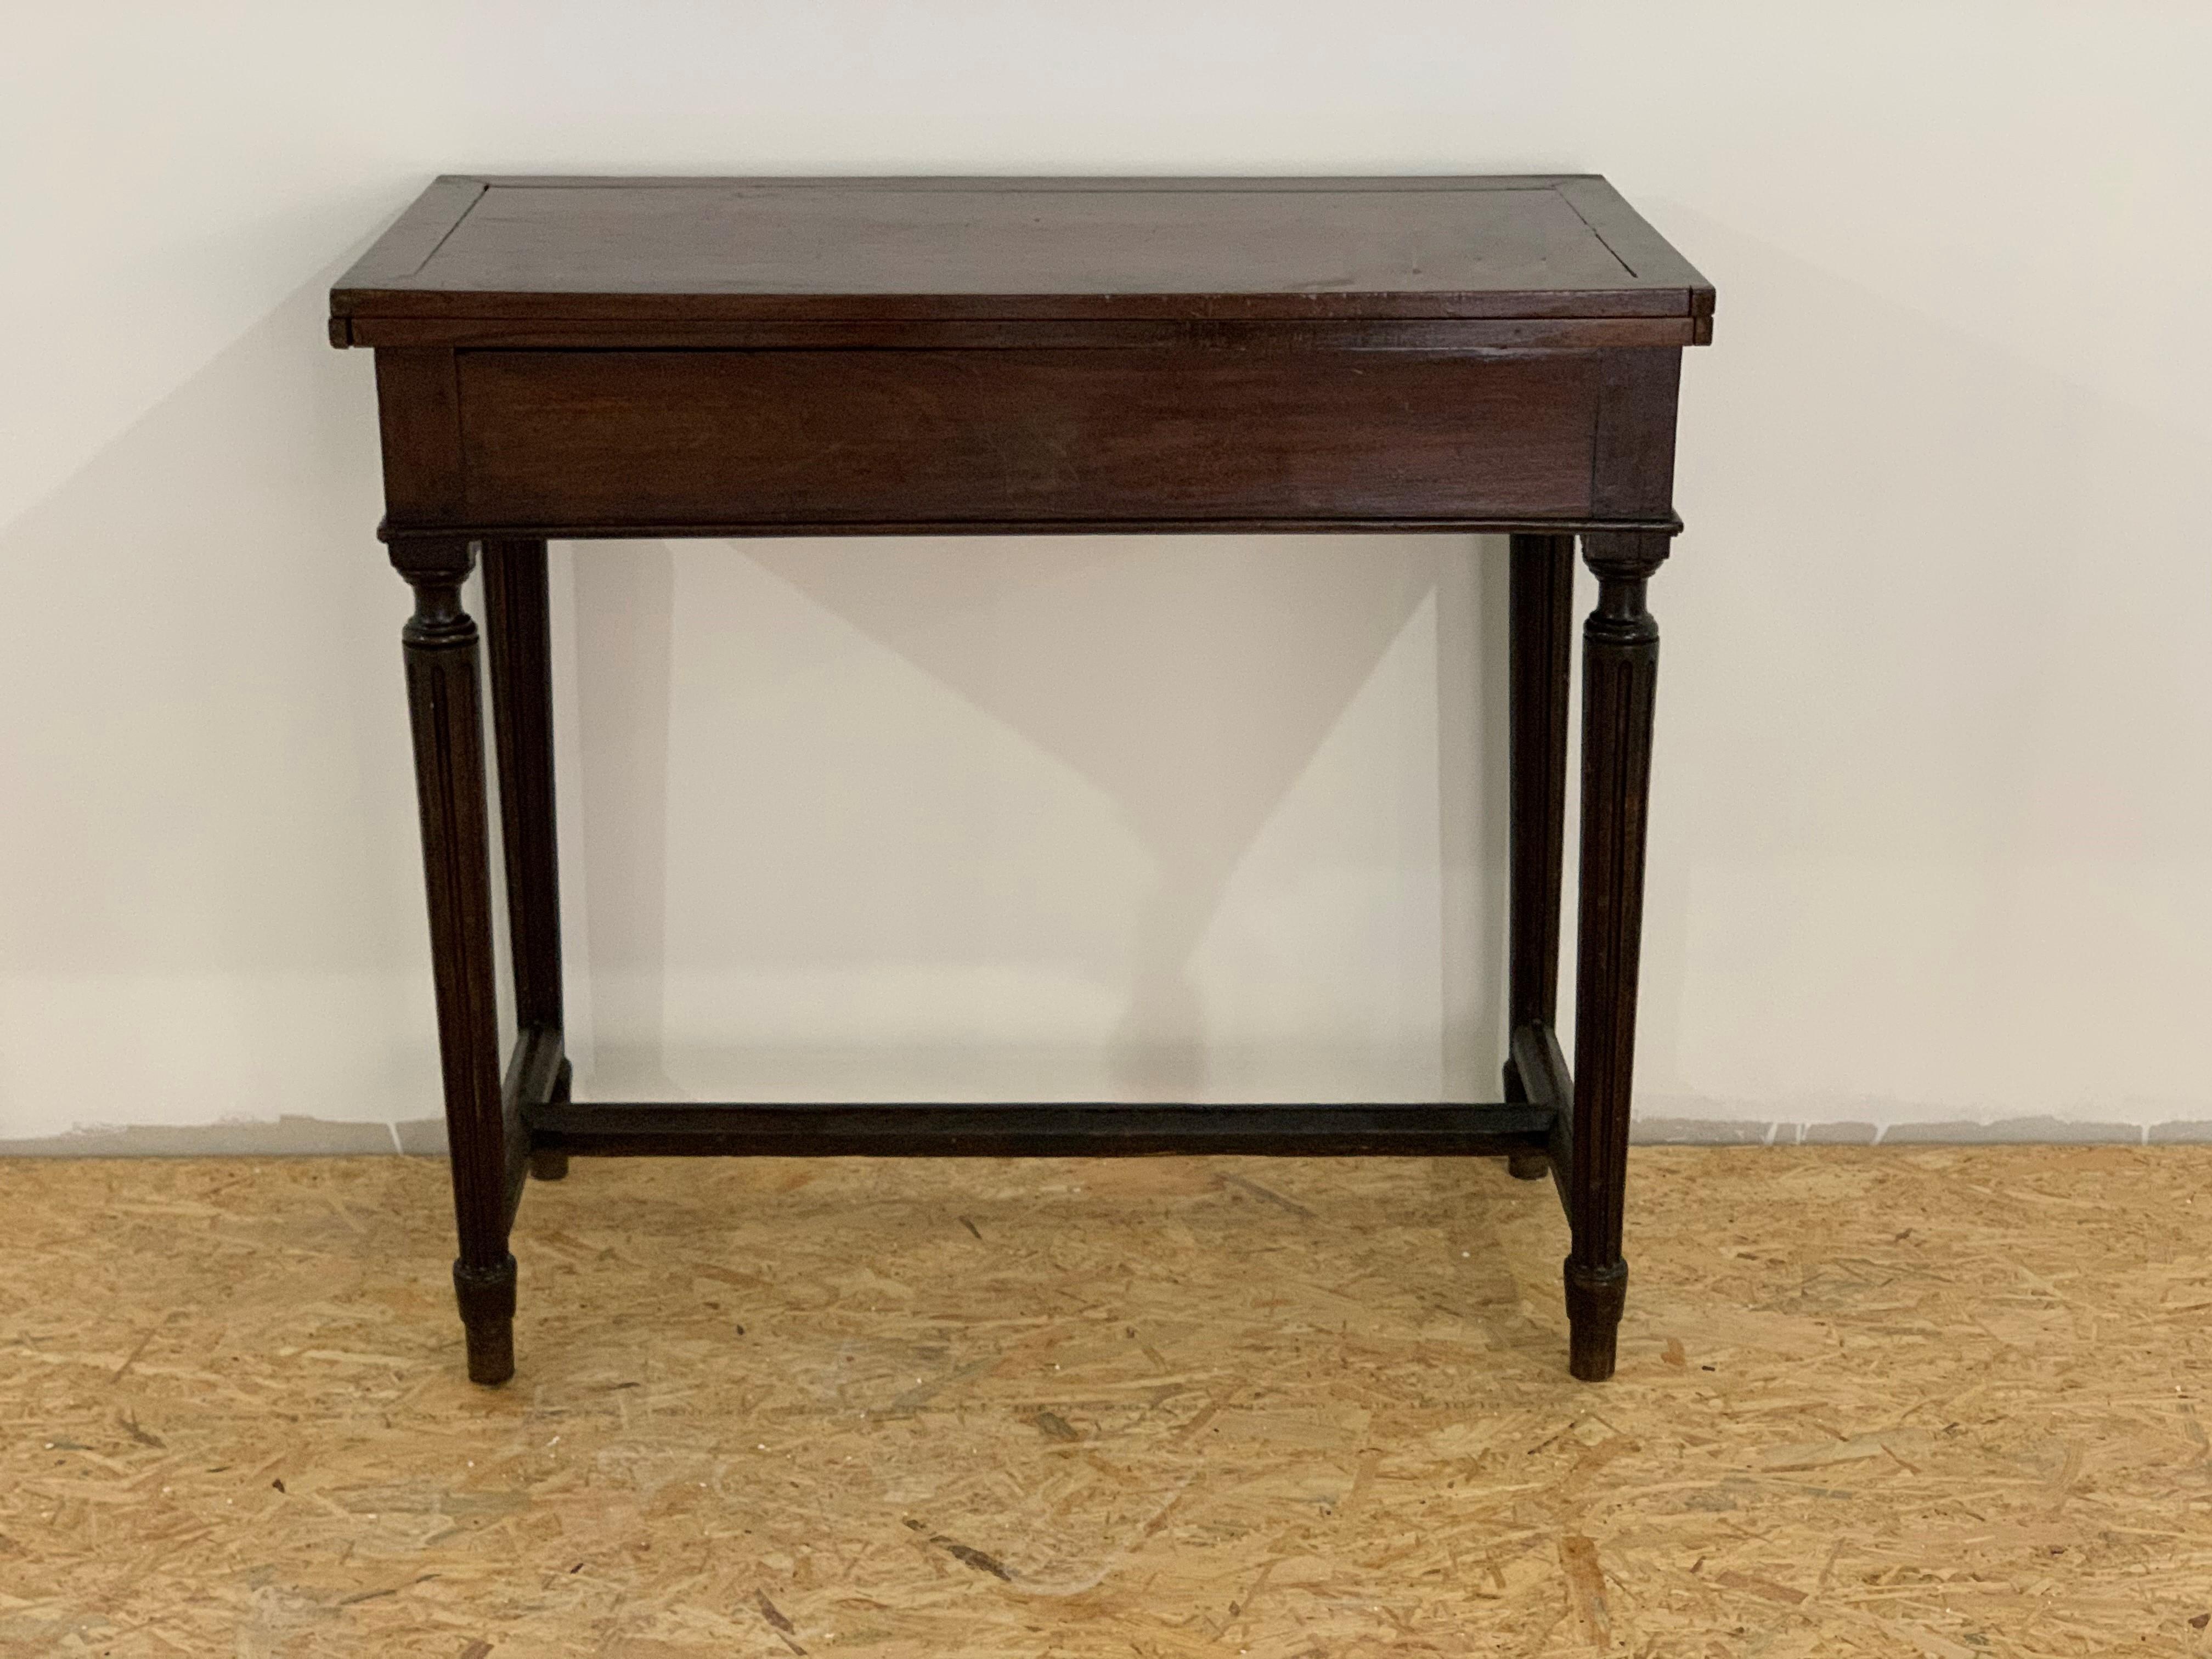 Spanish Colonial 19th Century French Fold over Mahogany Games or Tea Table For Sale